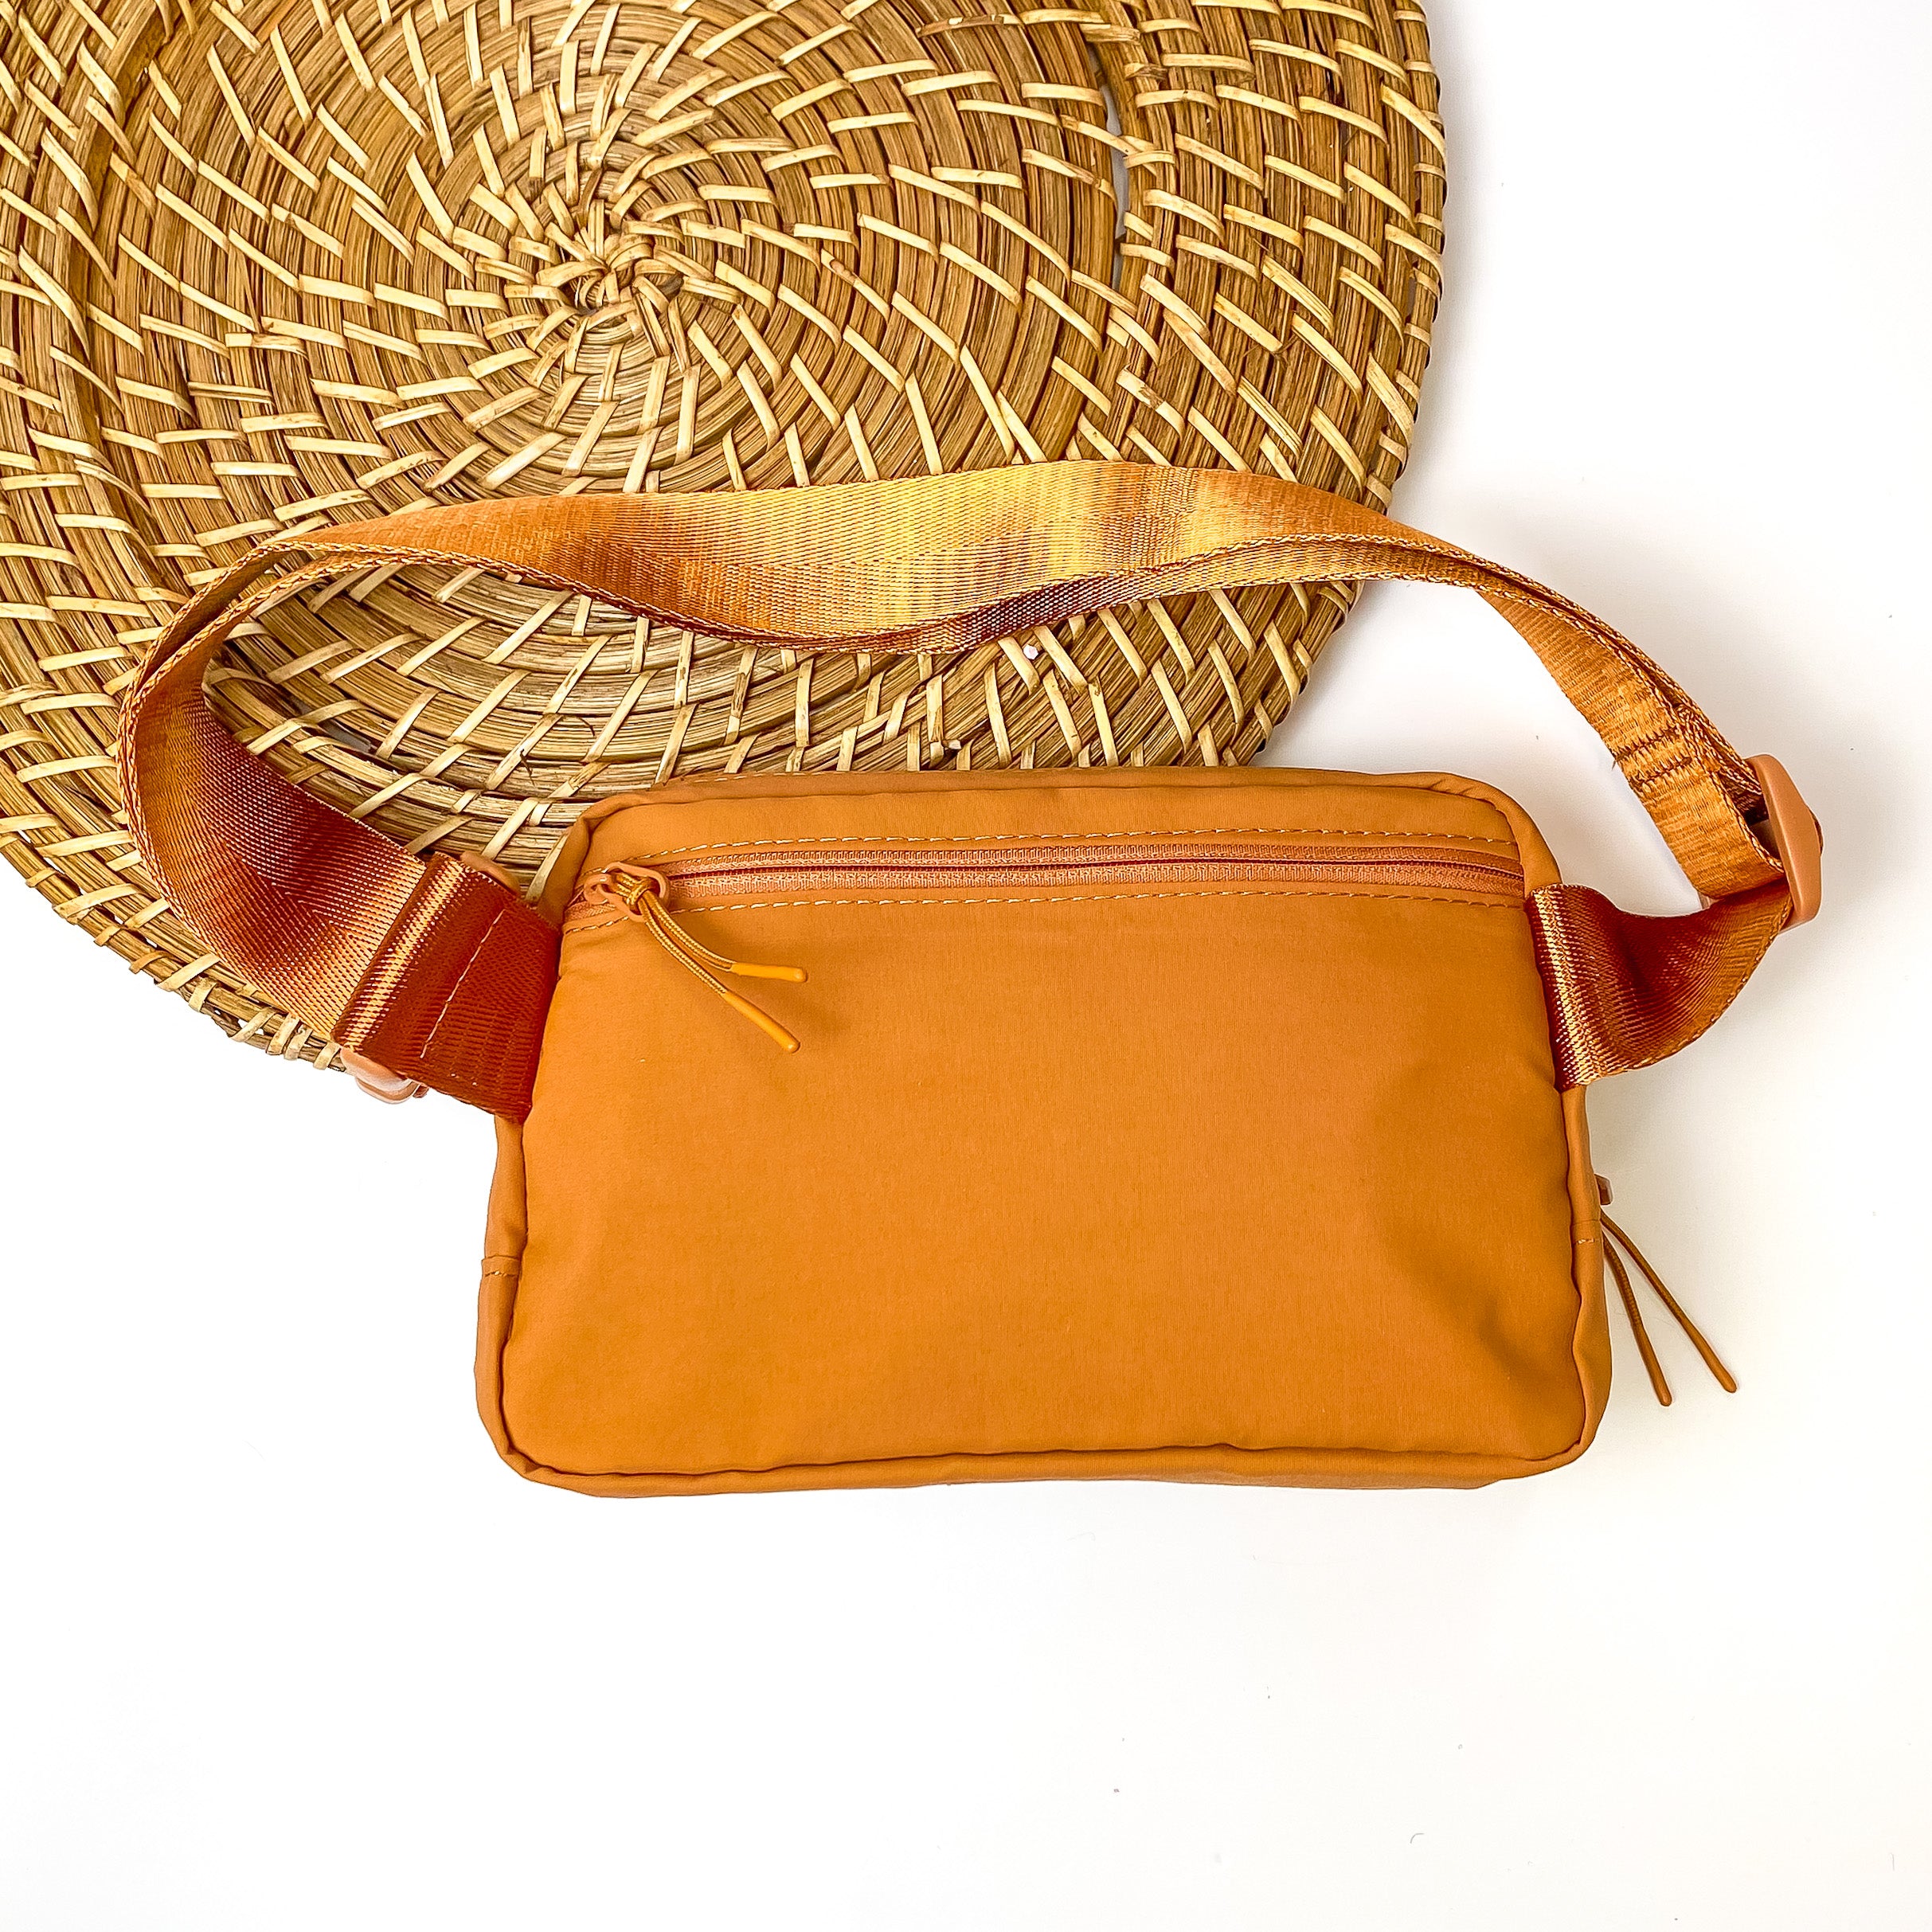 Love the Journey Fanny Pack in Tan - Giddy Up Glamour Boutique